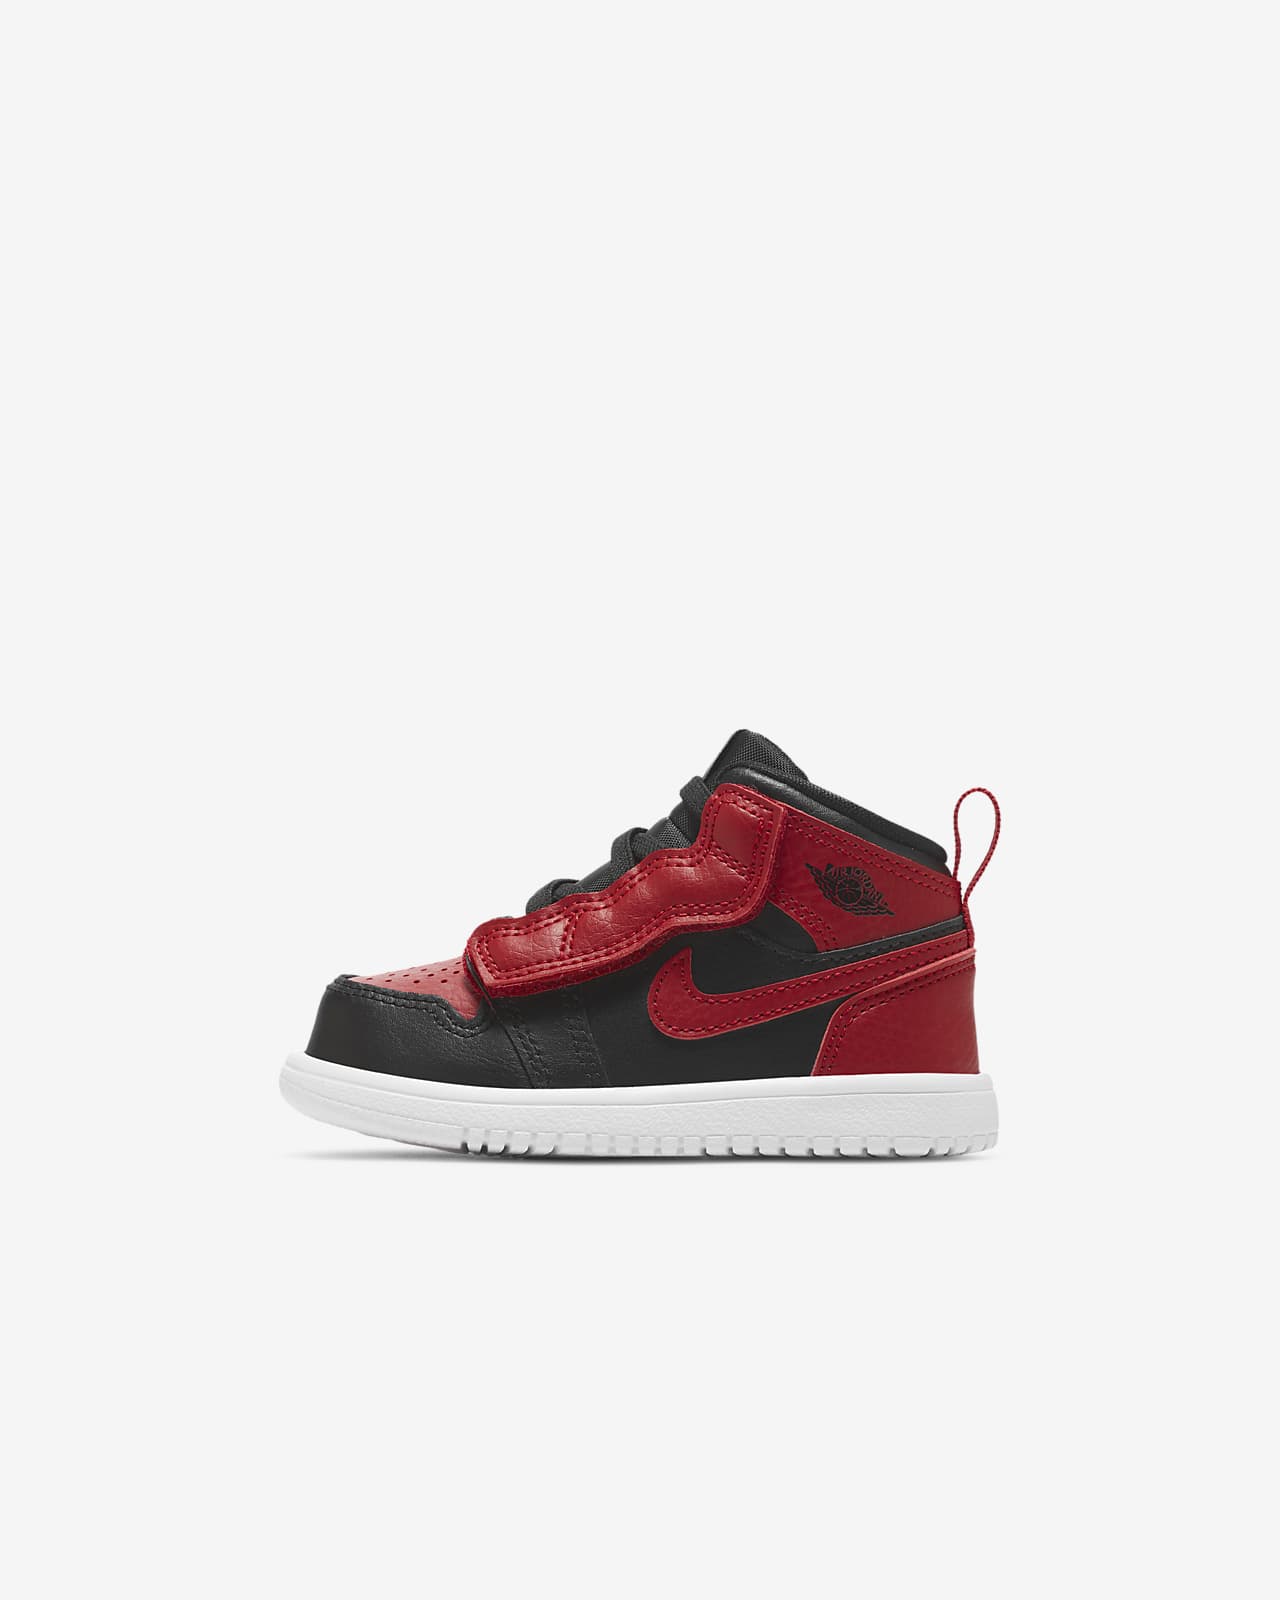 Jordan 1 Mid Baby and Toddler Shoe. Nike IL